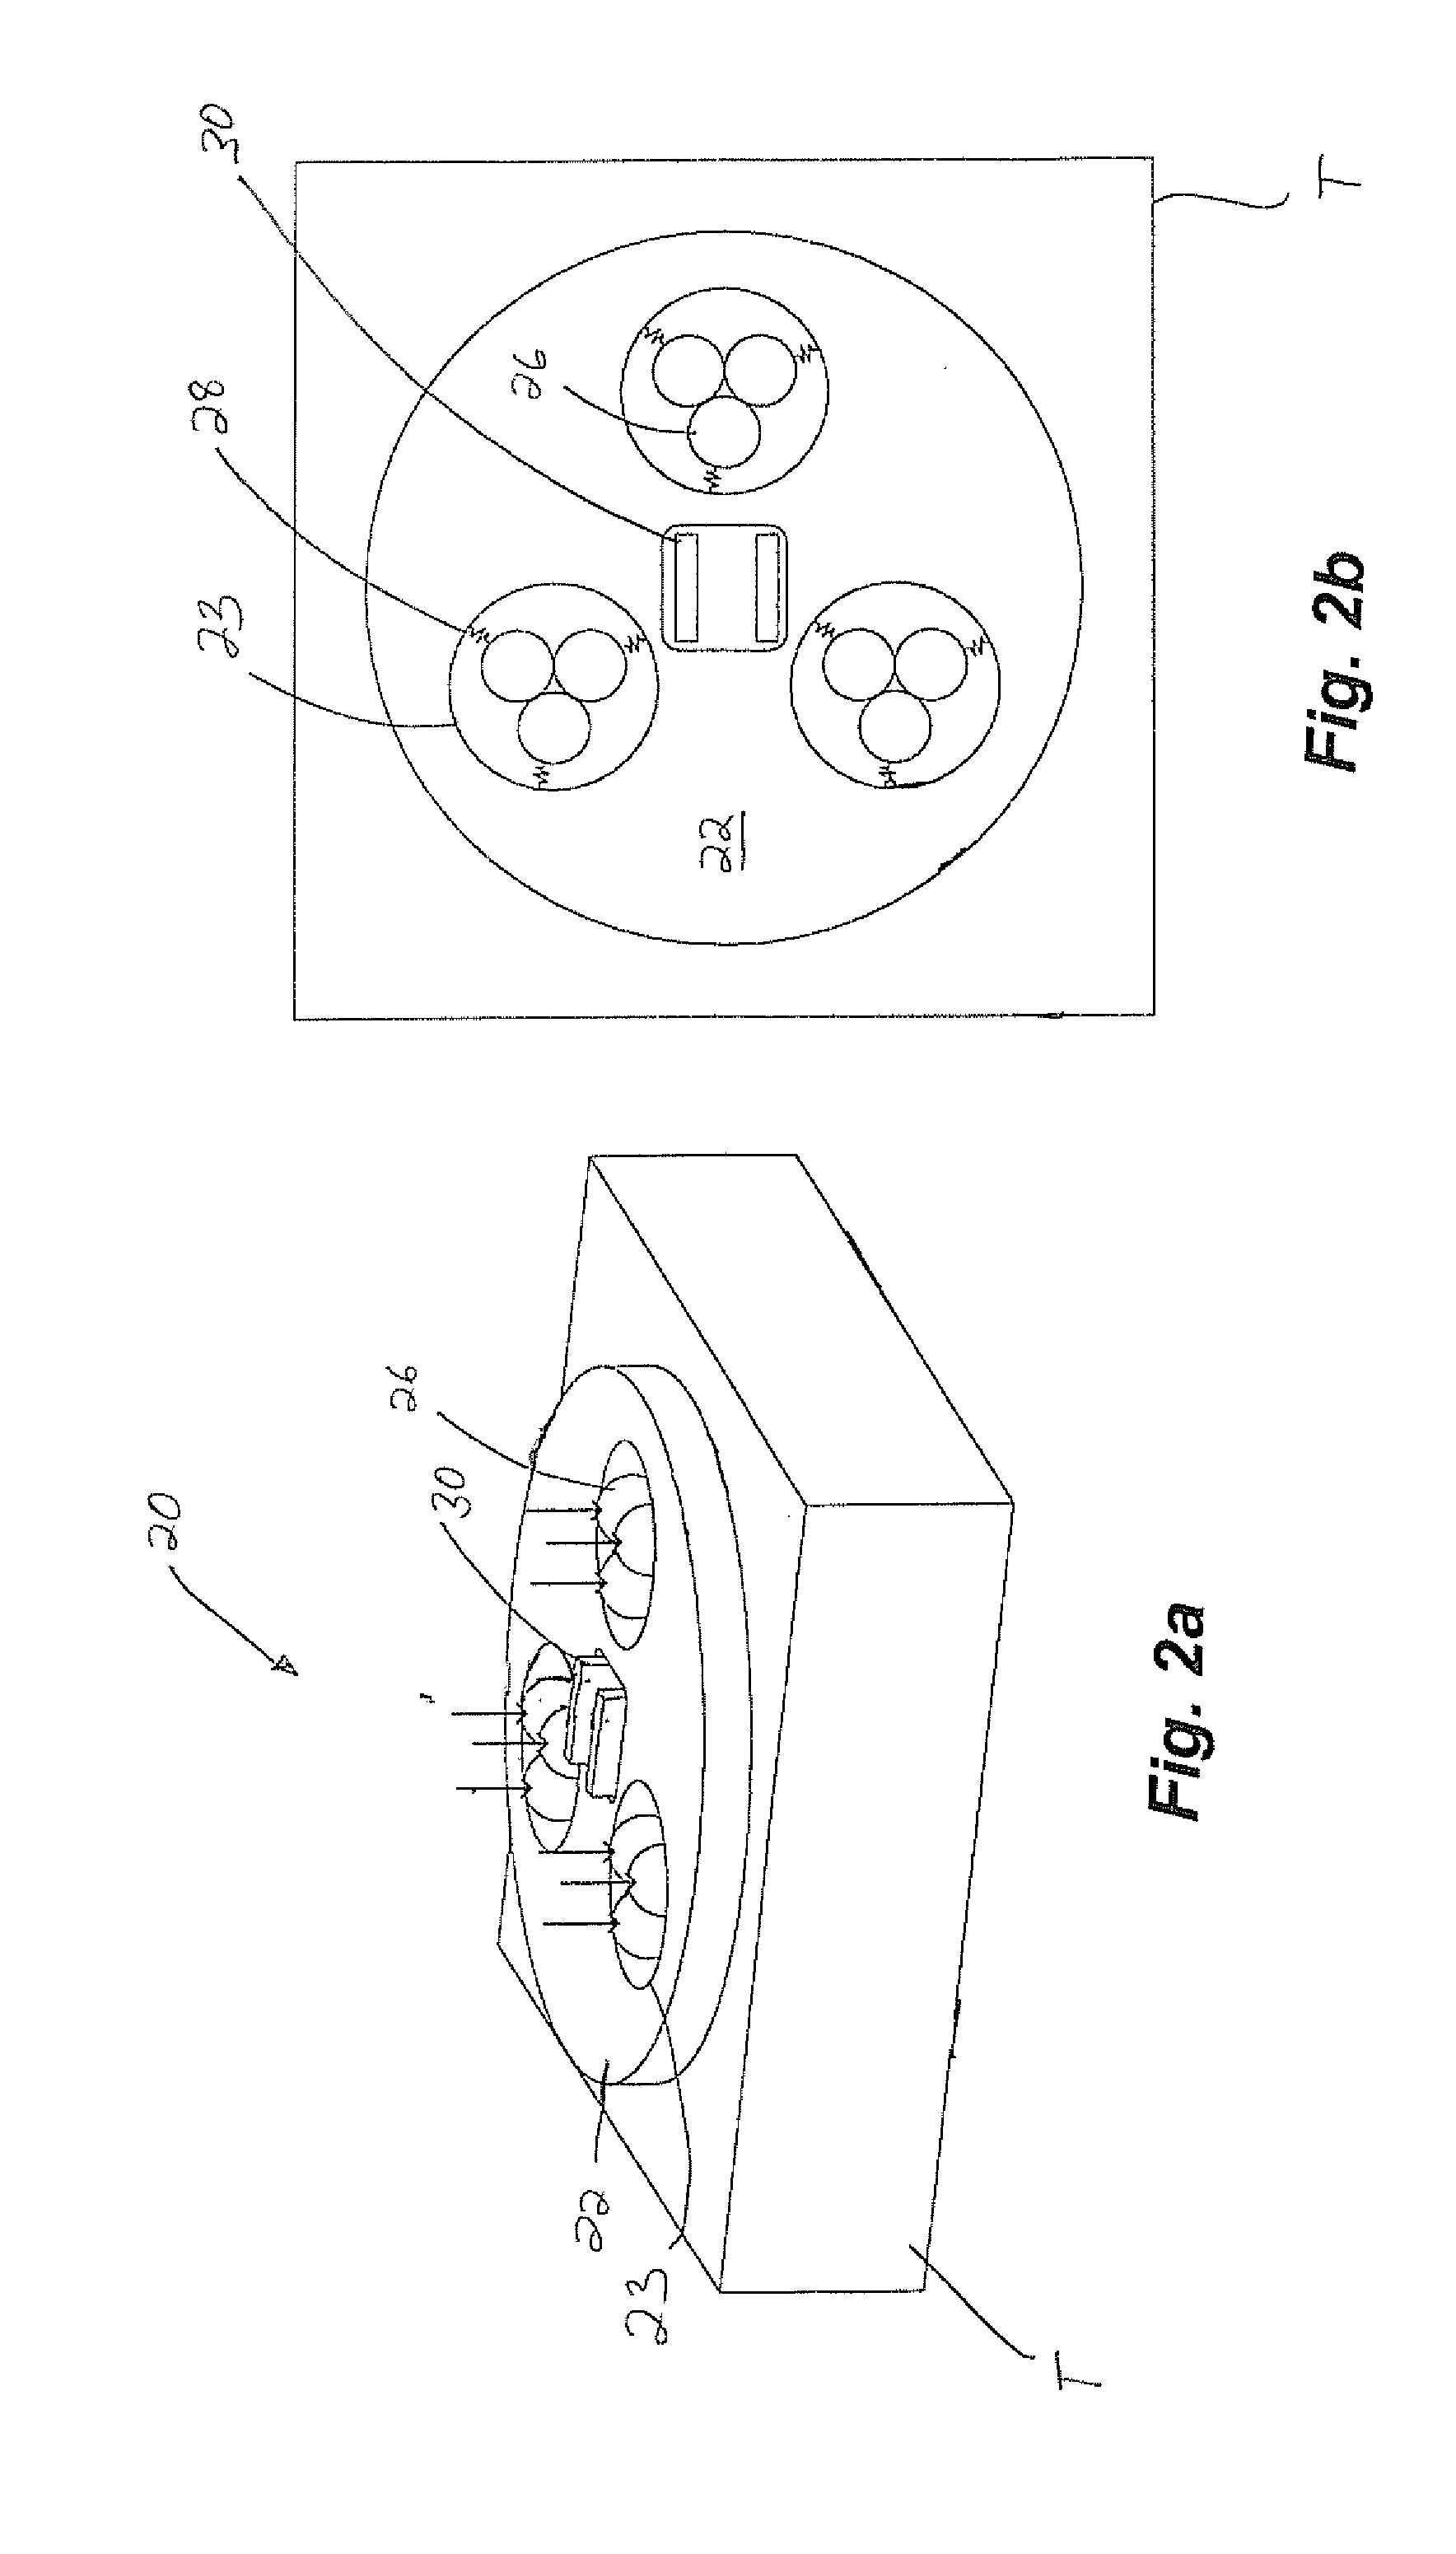 Apparatus for forming a kinematic coupling and related methods